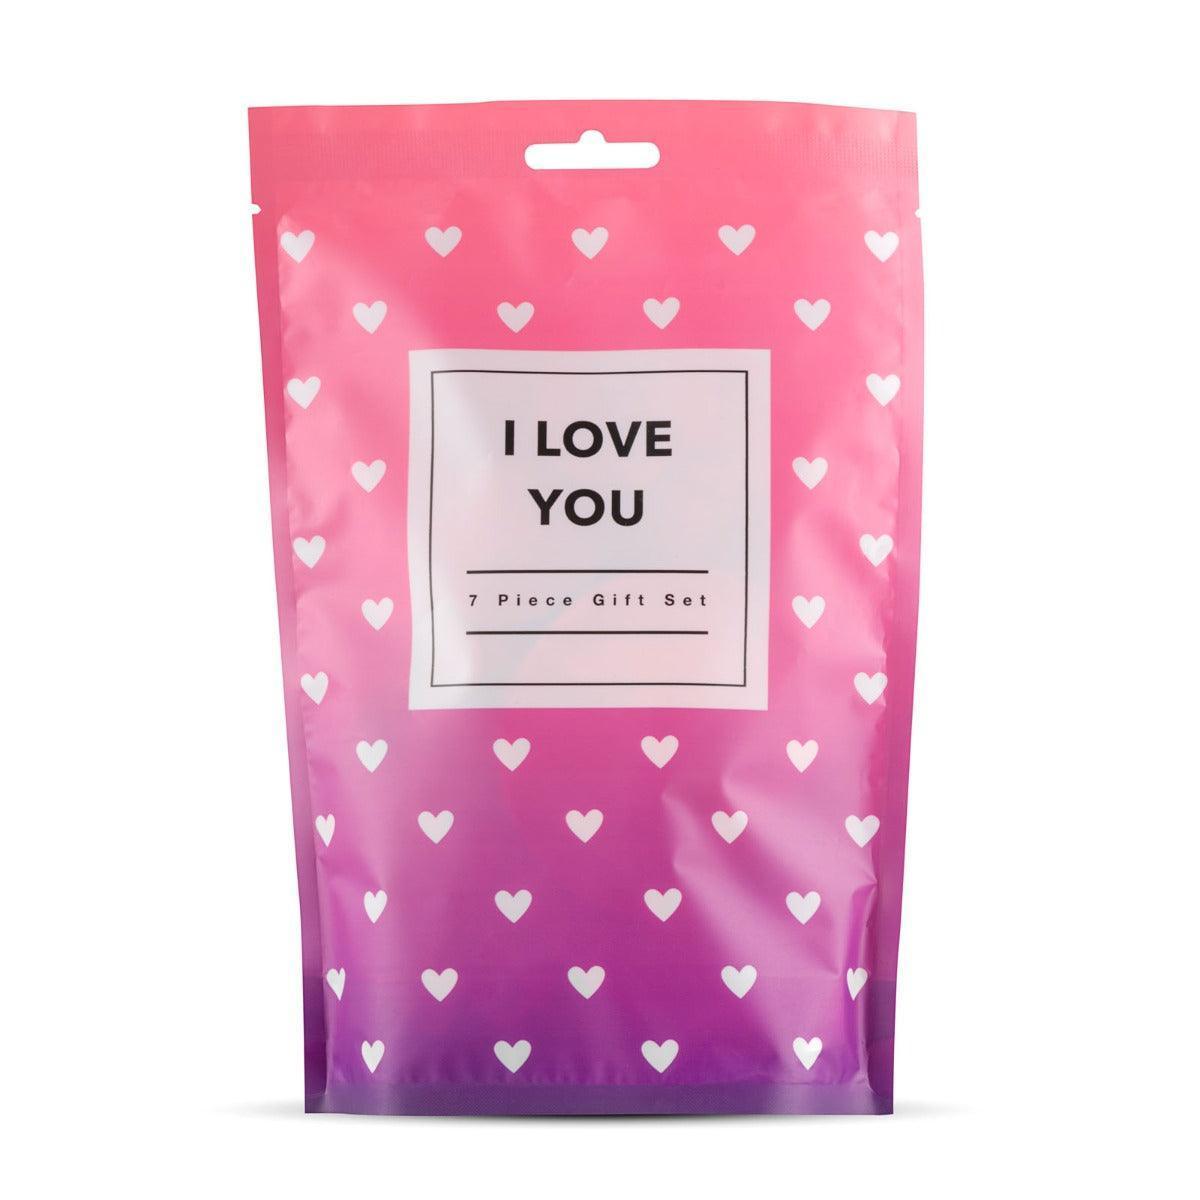 Loveboxxx - I Love You Couples Sex Toy Gift Set